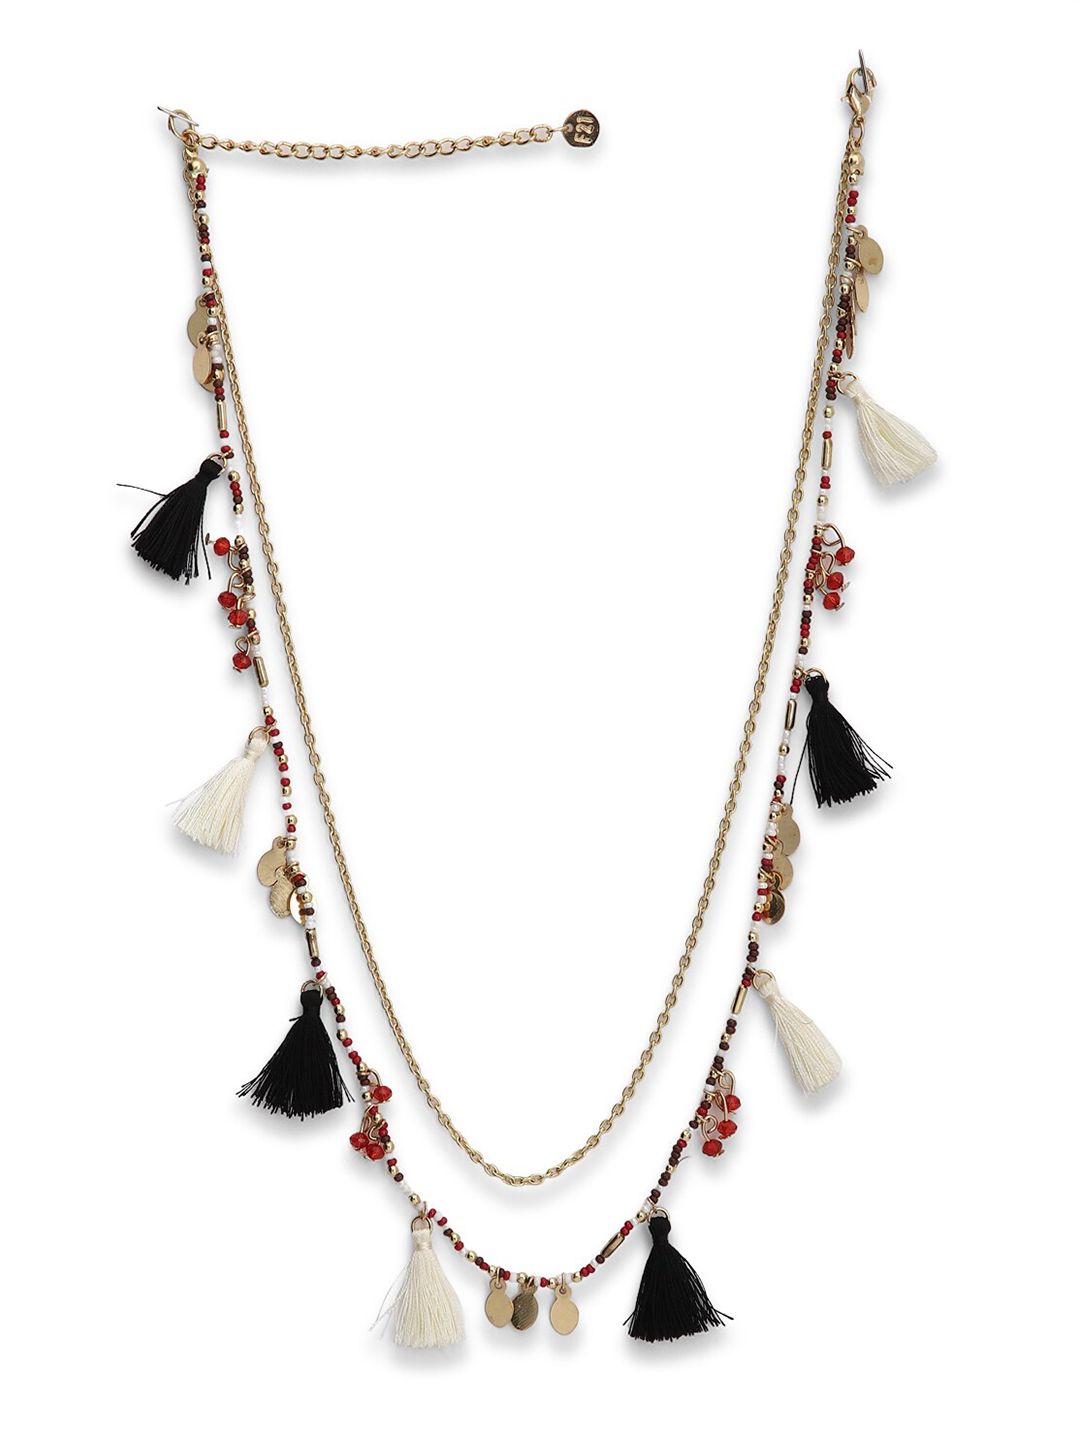 FOREVER 21 Black & White Tasselled Necklace Price in India